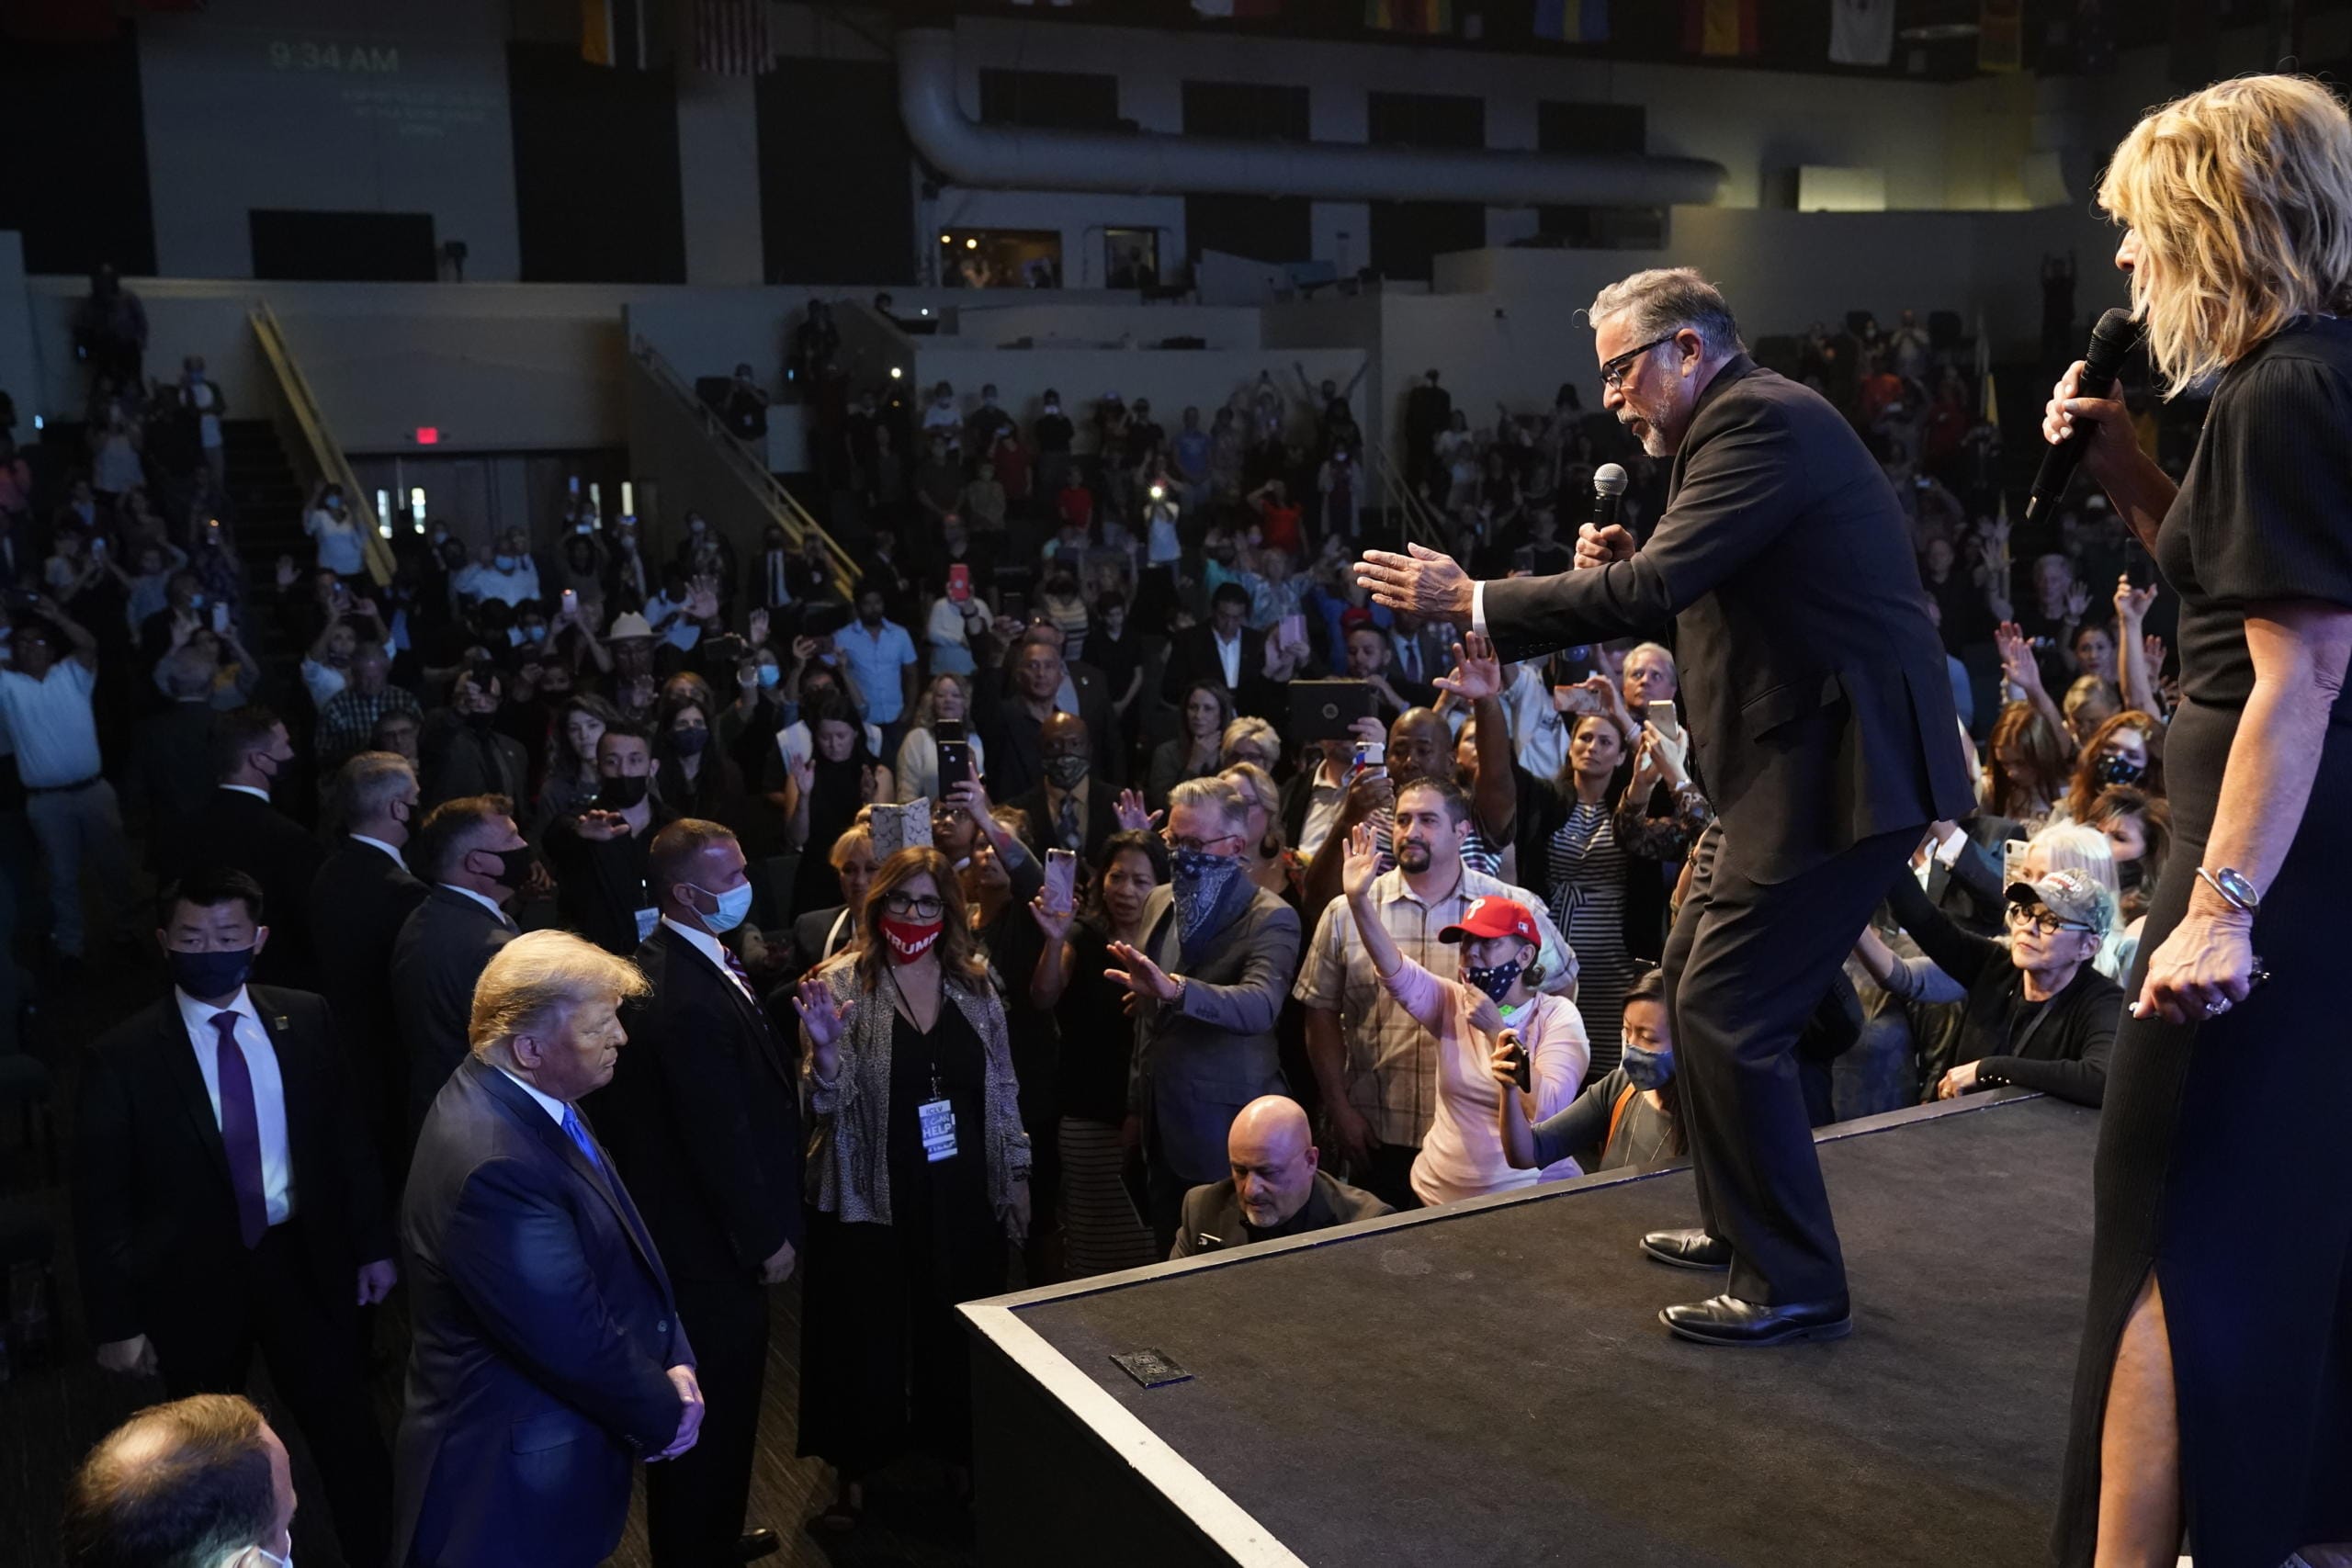 President Donald Trump, lower left, attends church at International Church of Las Vegas, as Pastor Pasqual Urrabazo, second from the right, gestures on stage, Sunday, Oct. 18, 2020, in Las Vegas, Nev.